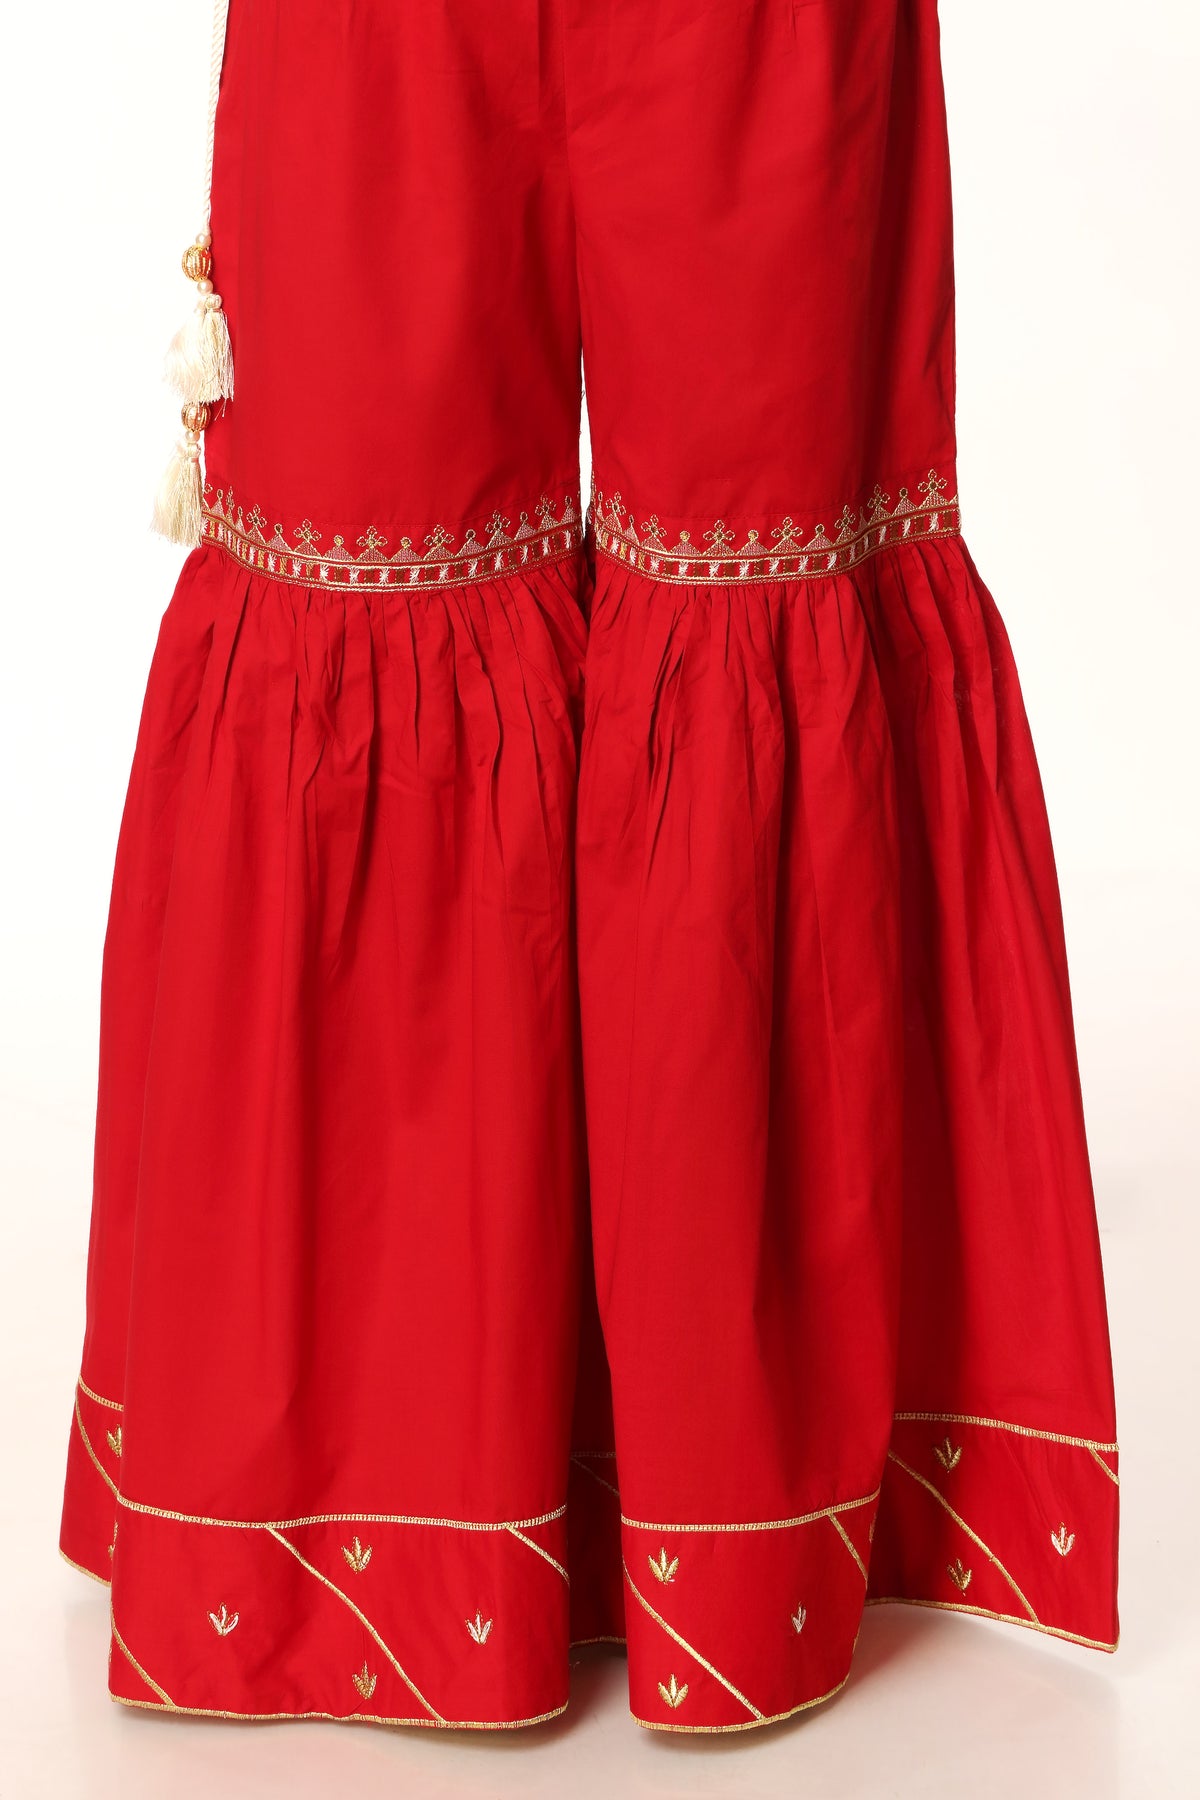 Red Booti Gharara in Red coloured Printed Lawn fabric